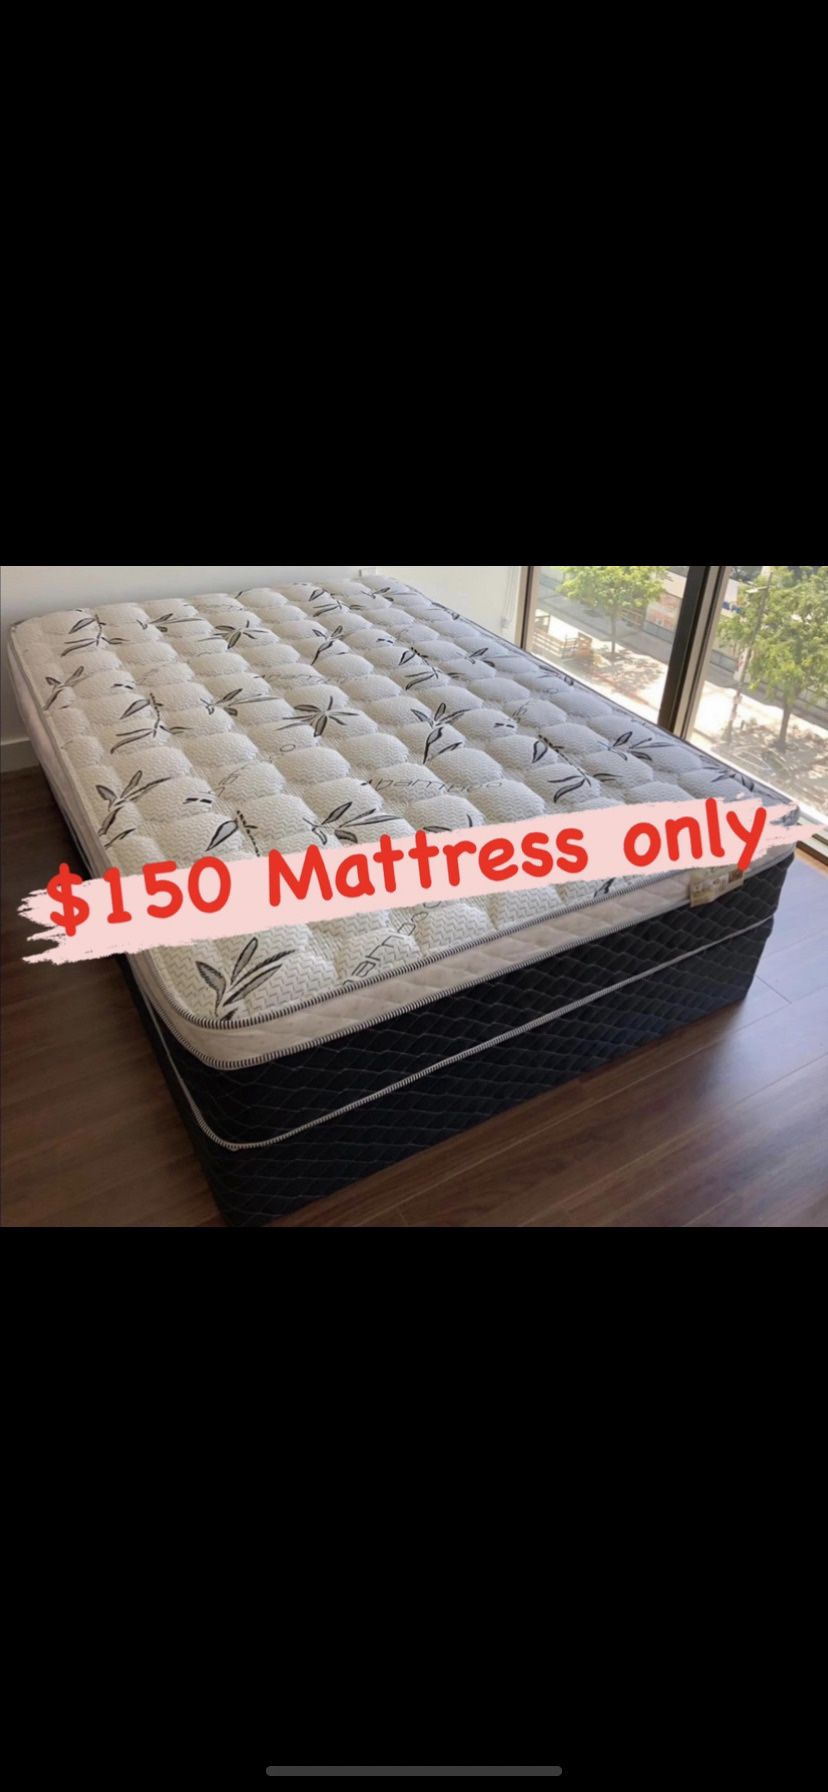 new orthopedic Pillow top mattresses Colchones nuevos ortopédicos pillow top   Queen size  $200 - $260 With Box Spring   Full size  $190 - $240 With B